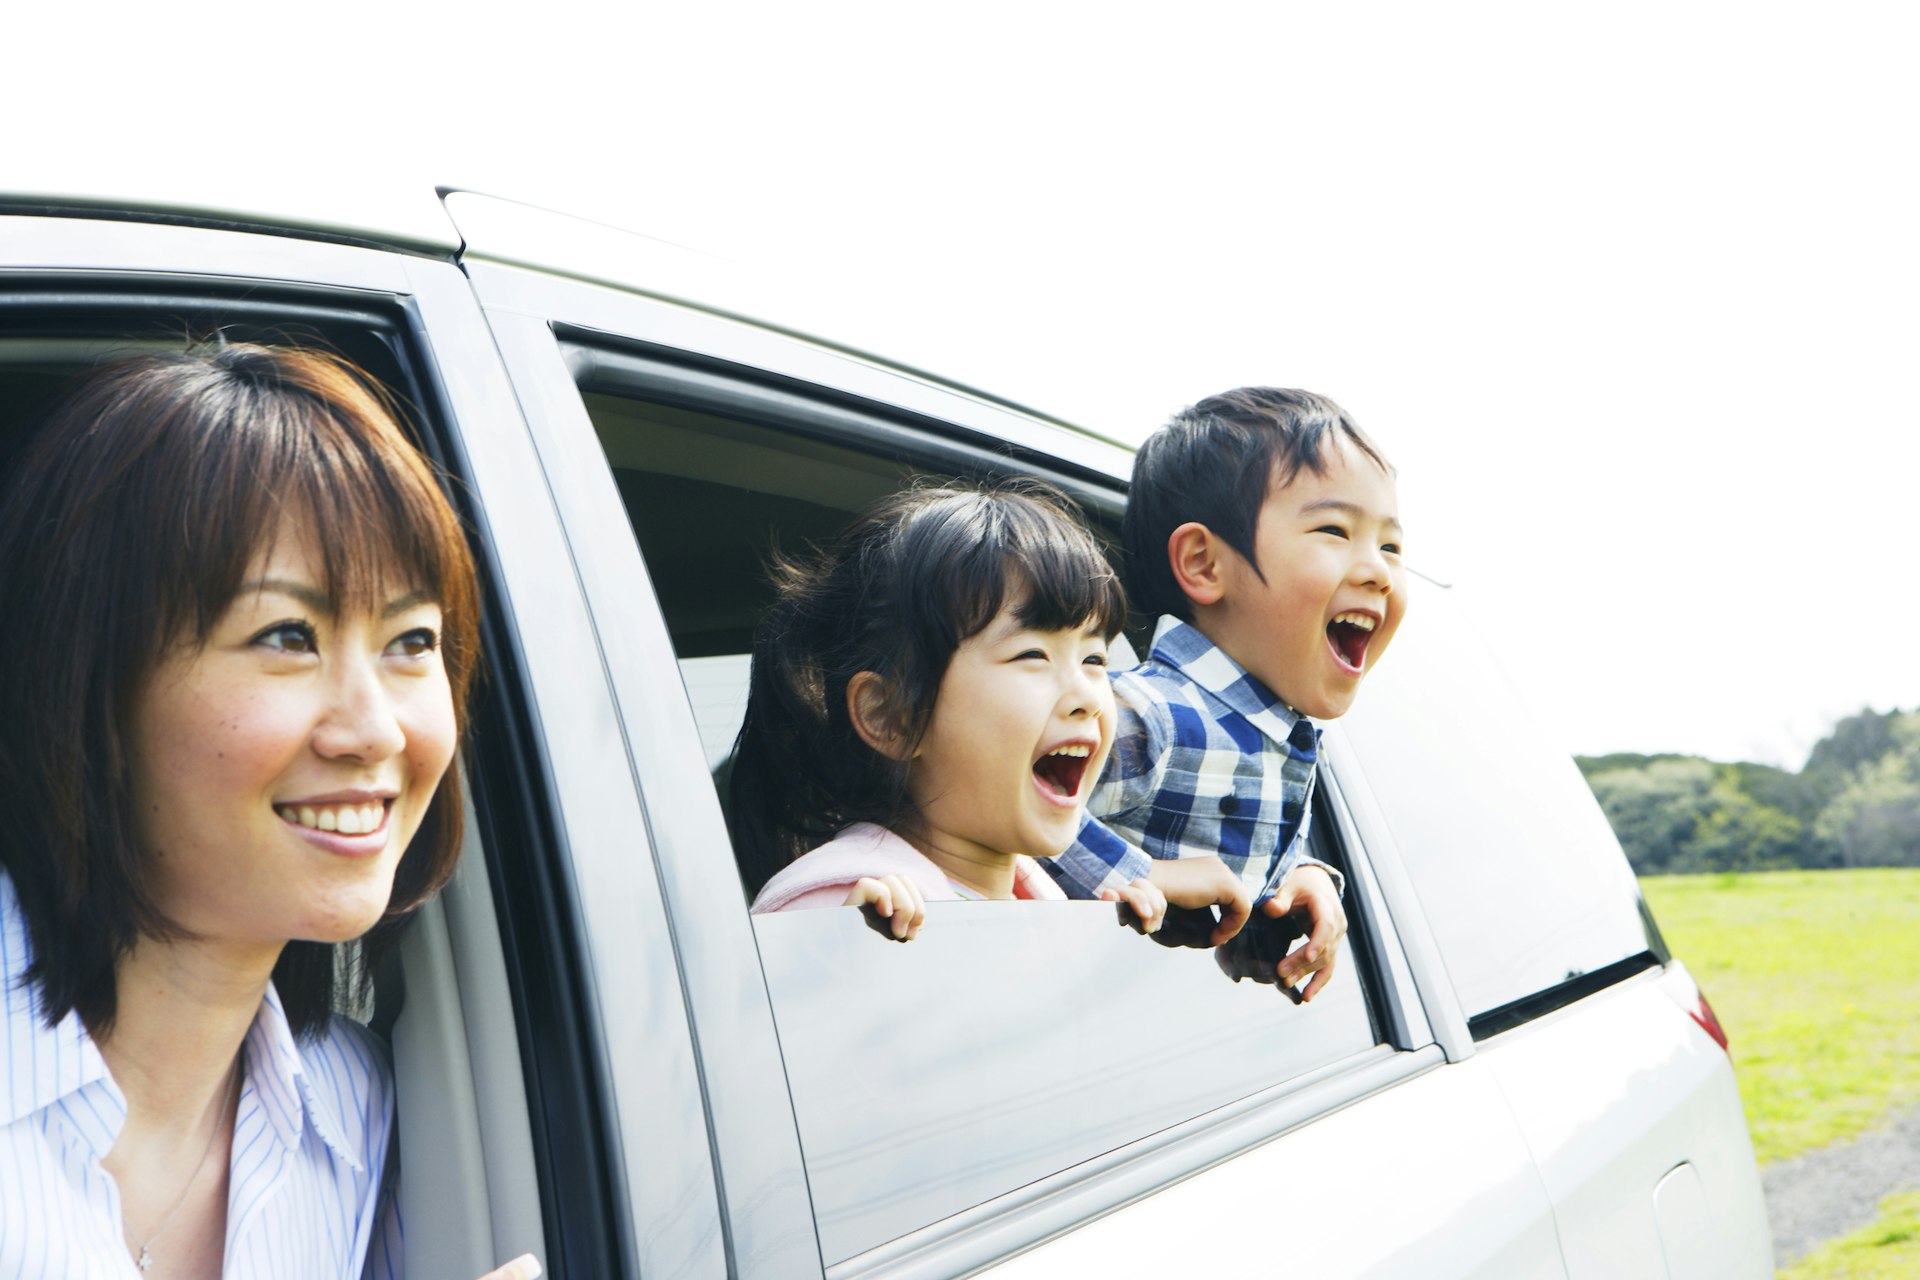 Excited Japanese family - a mother and two young kids - smile and cheer from a car window in rural Japan on a sunny day